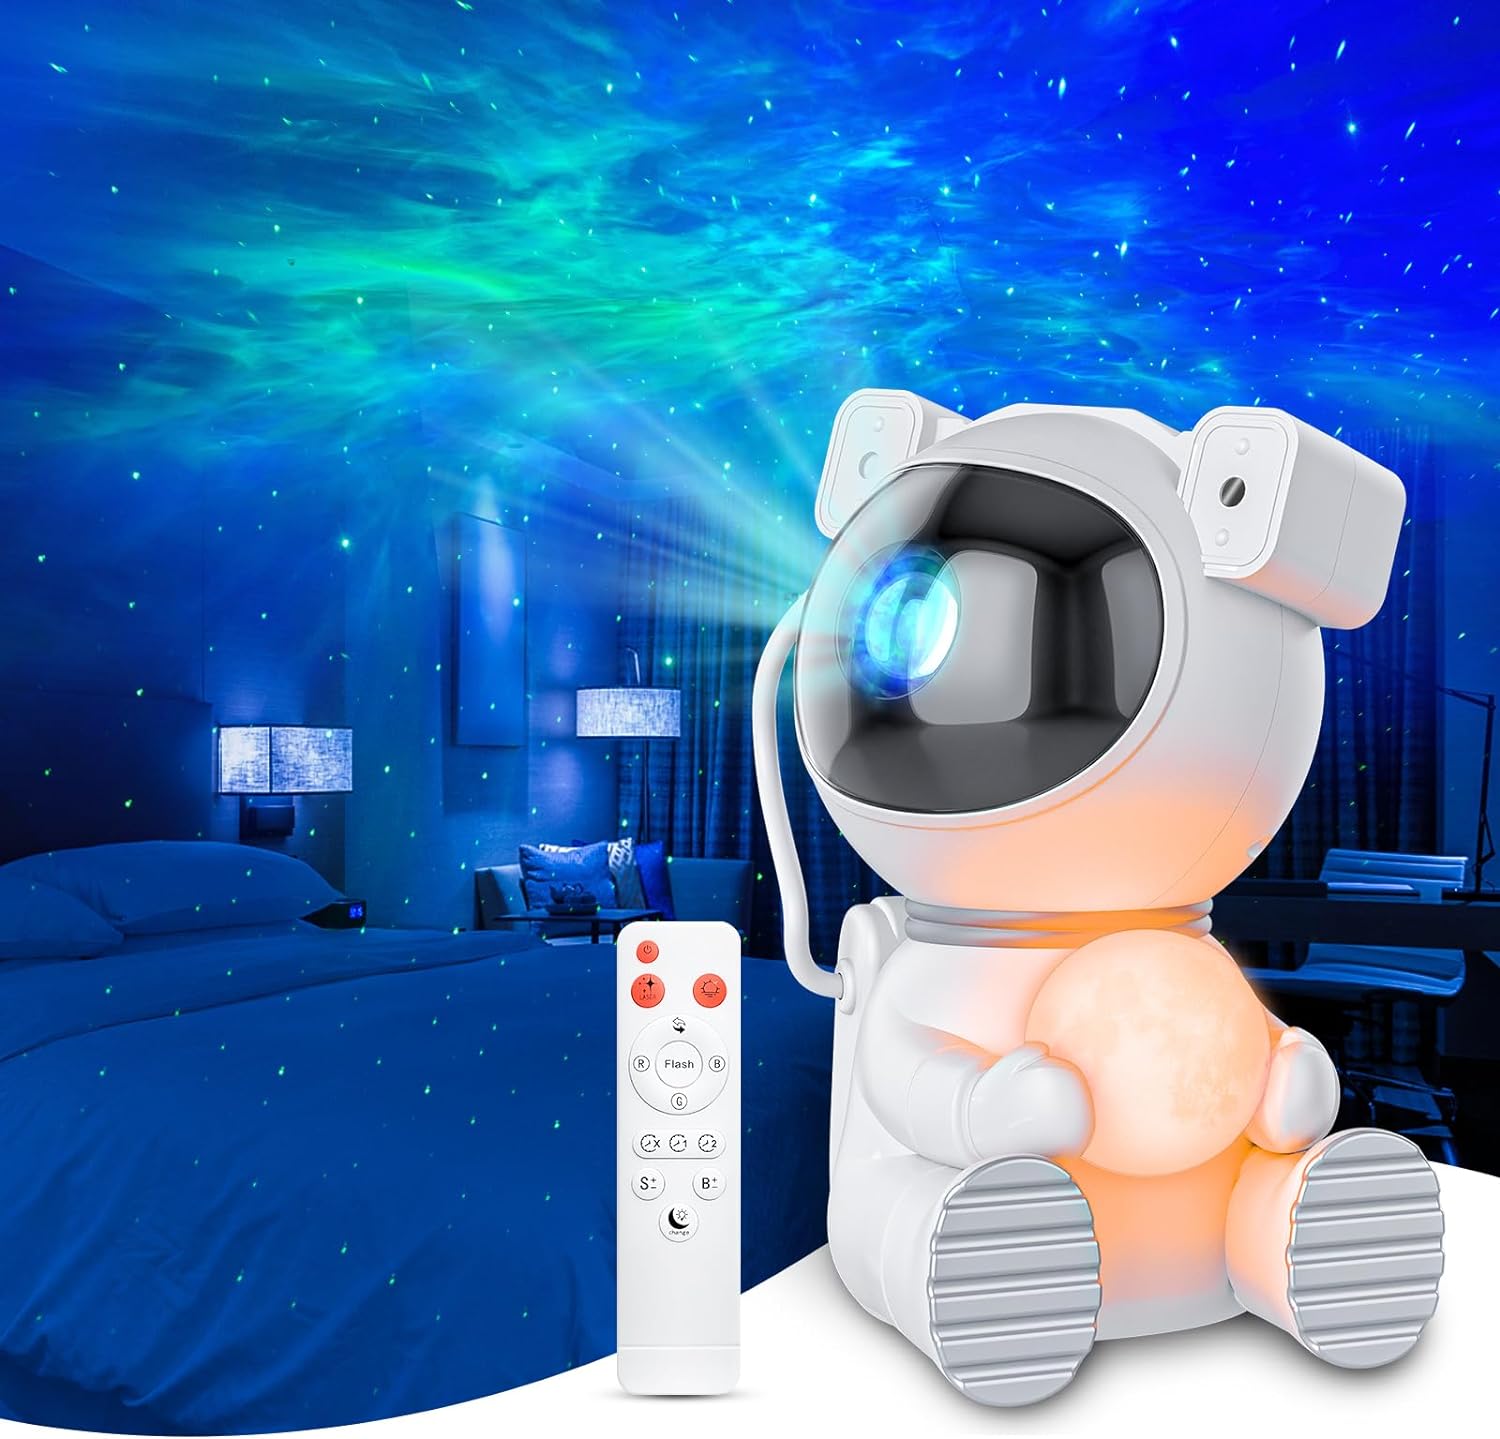 Astronaut Light Projector, Galaxy Projector for Bedroom, Star Projector with Moon Lamp, LED Nebula Night Light for Kids, Room Decor, Party, Gift